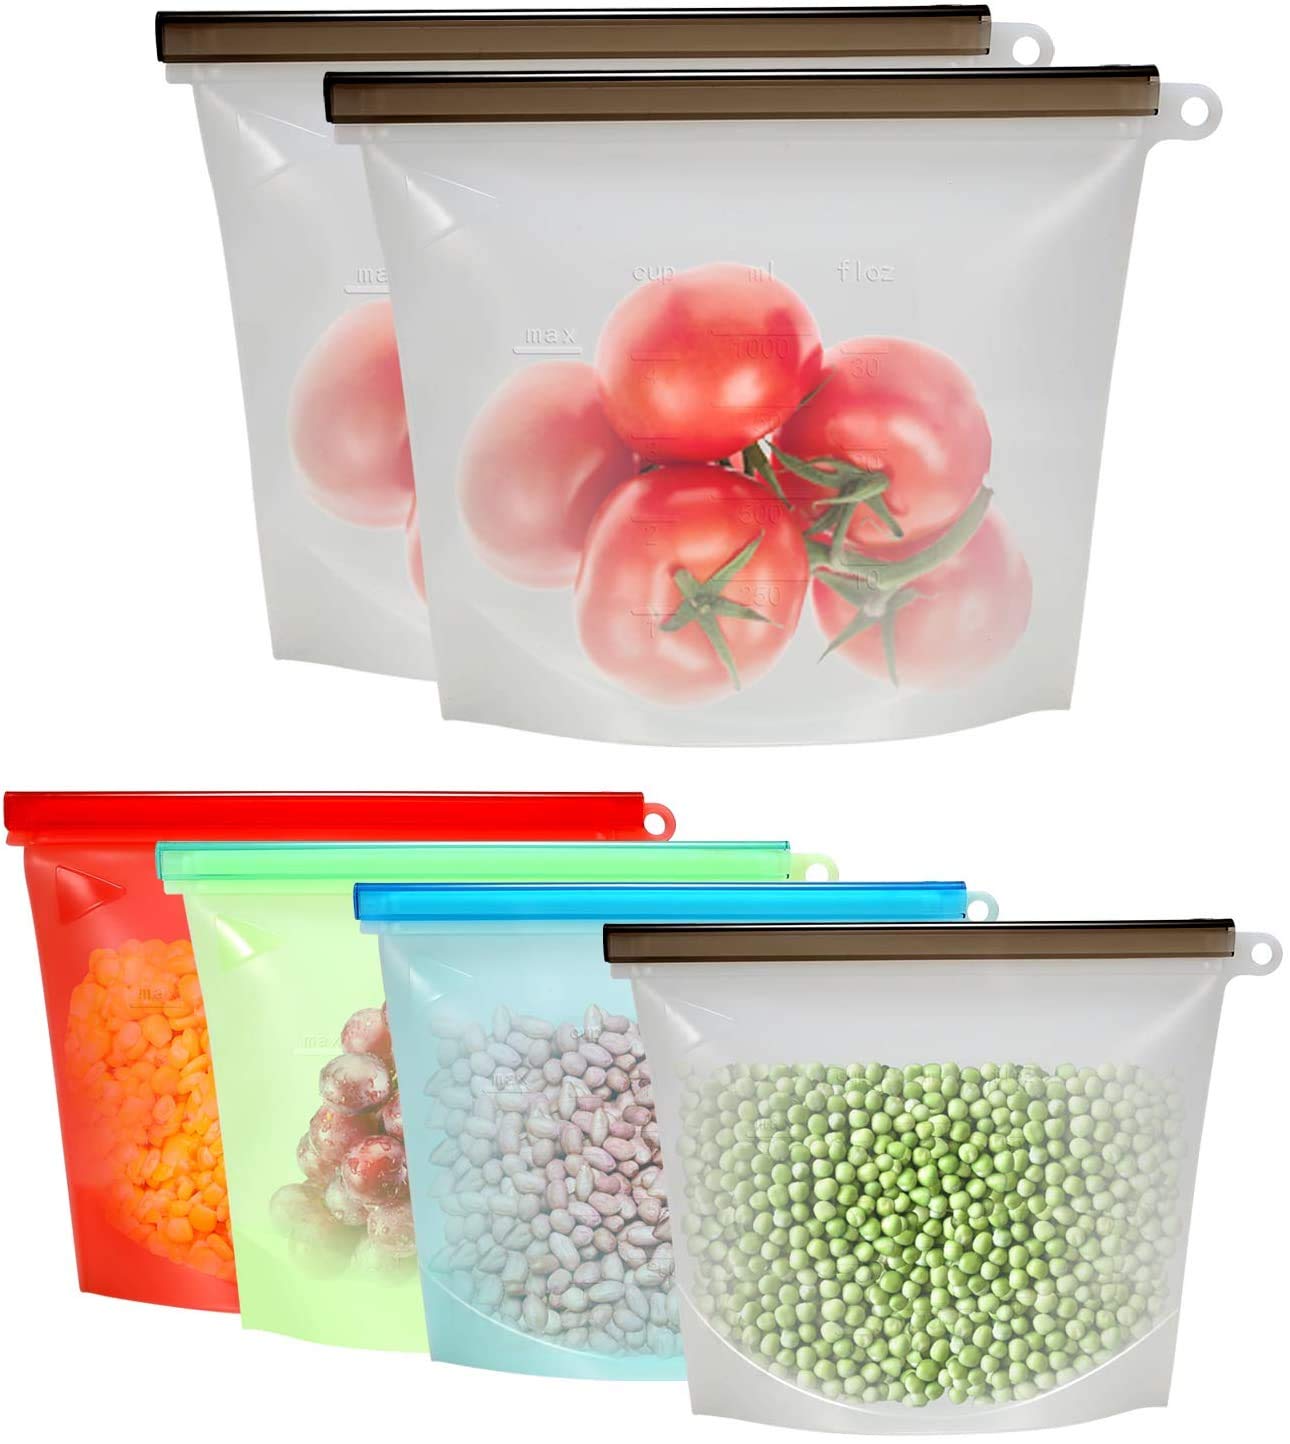 Reusable Silicone Food Storage Bag - Home Essentials Store Retail